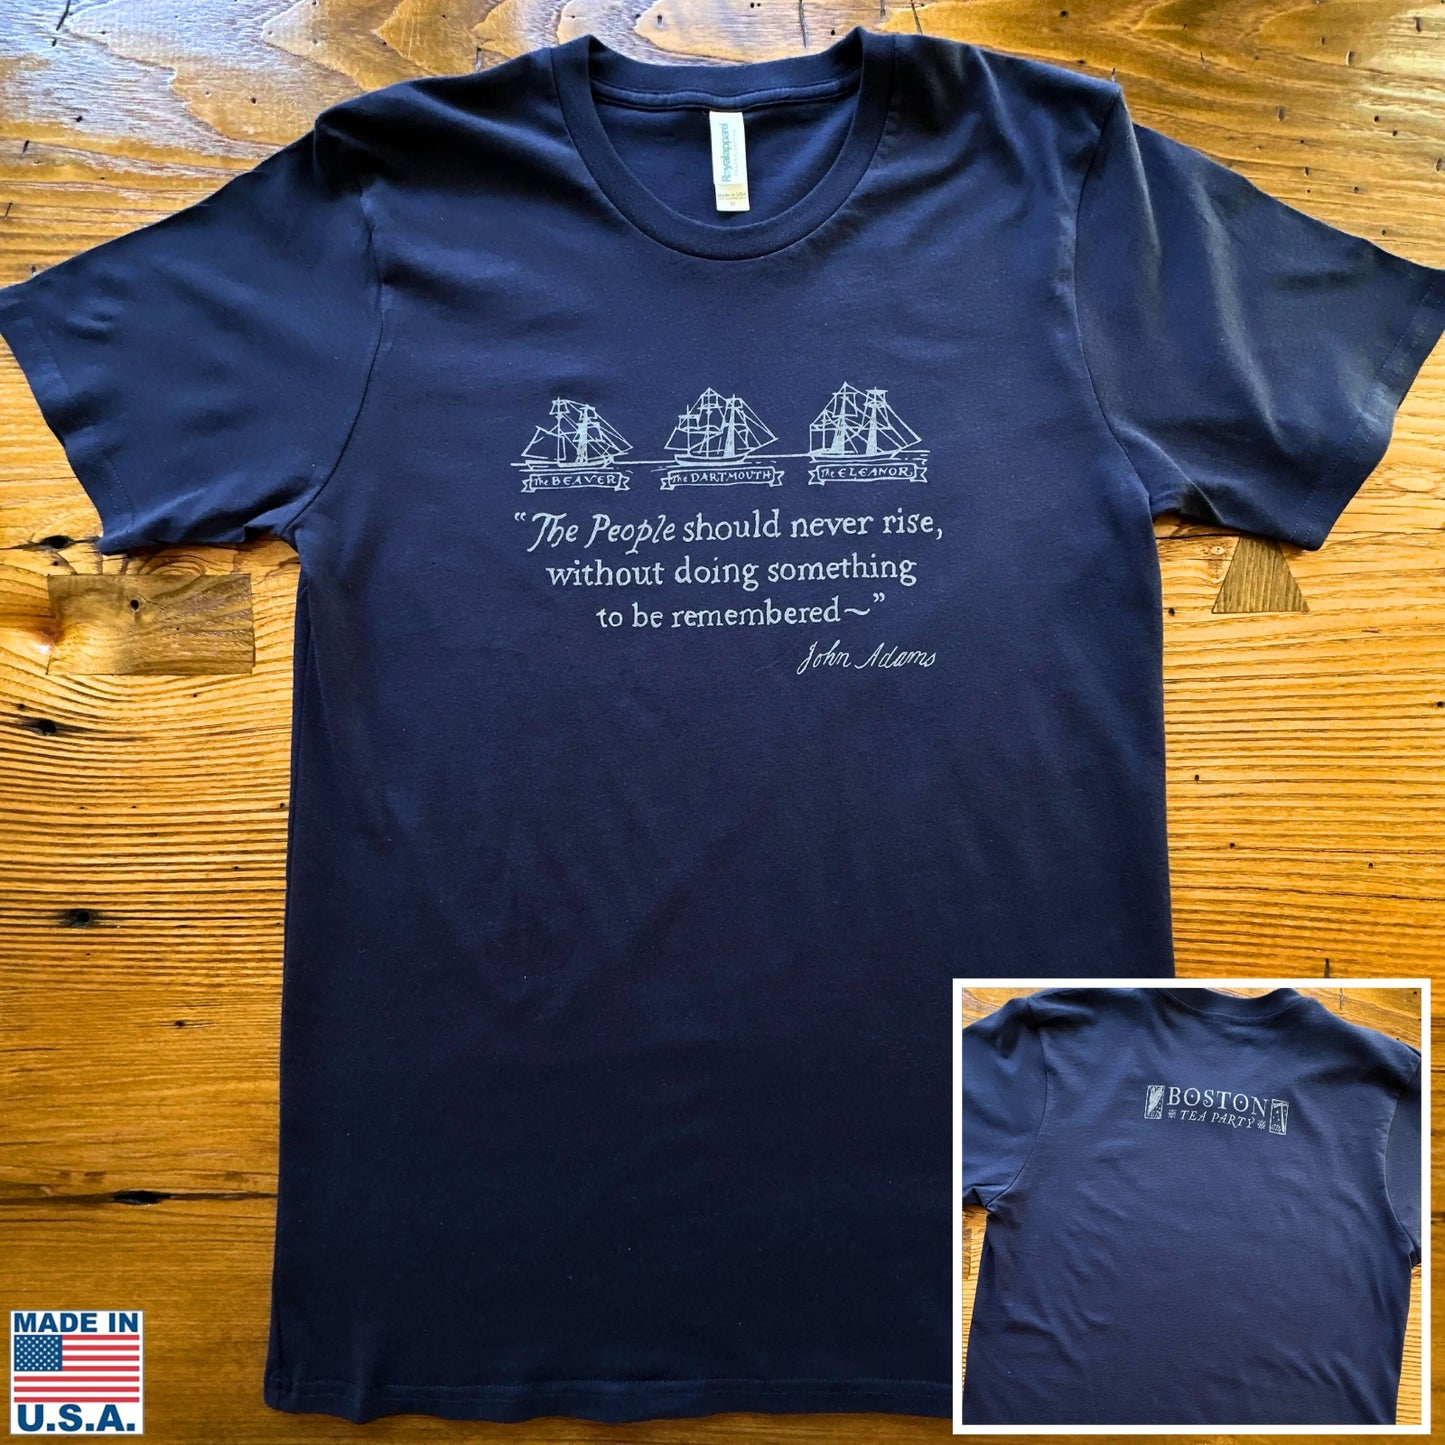 Boston Tea Party 250th Anniversary Shirt Made in America — 100% Organic Cotton from The History List store